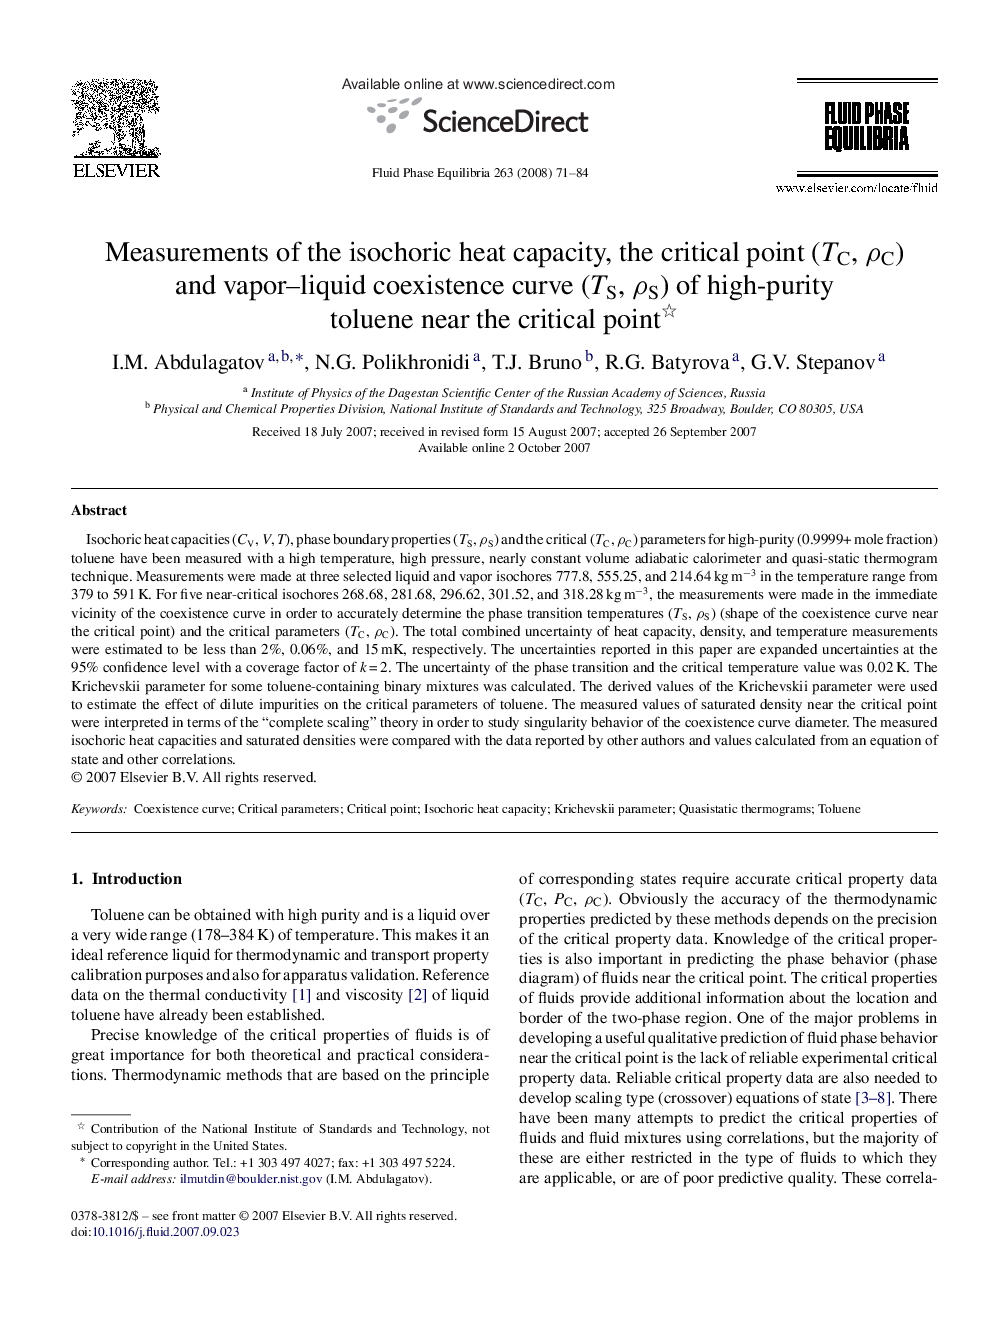 Measurements of the isochoric heat capacity, the critical point (TC, ρC) and vapor–liquid coexistence curve (TS, ρS) of high-purity toluene near the critical point 